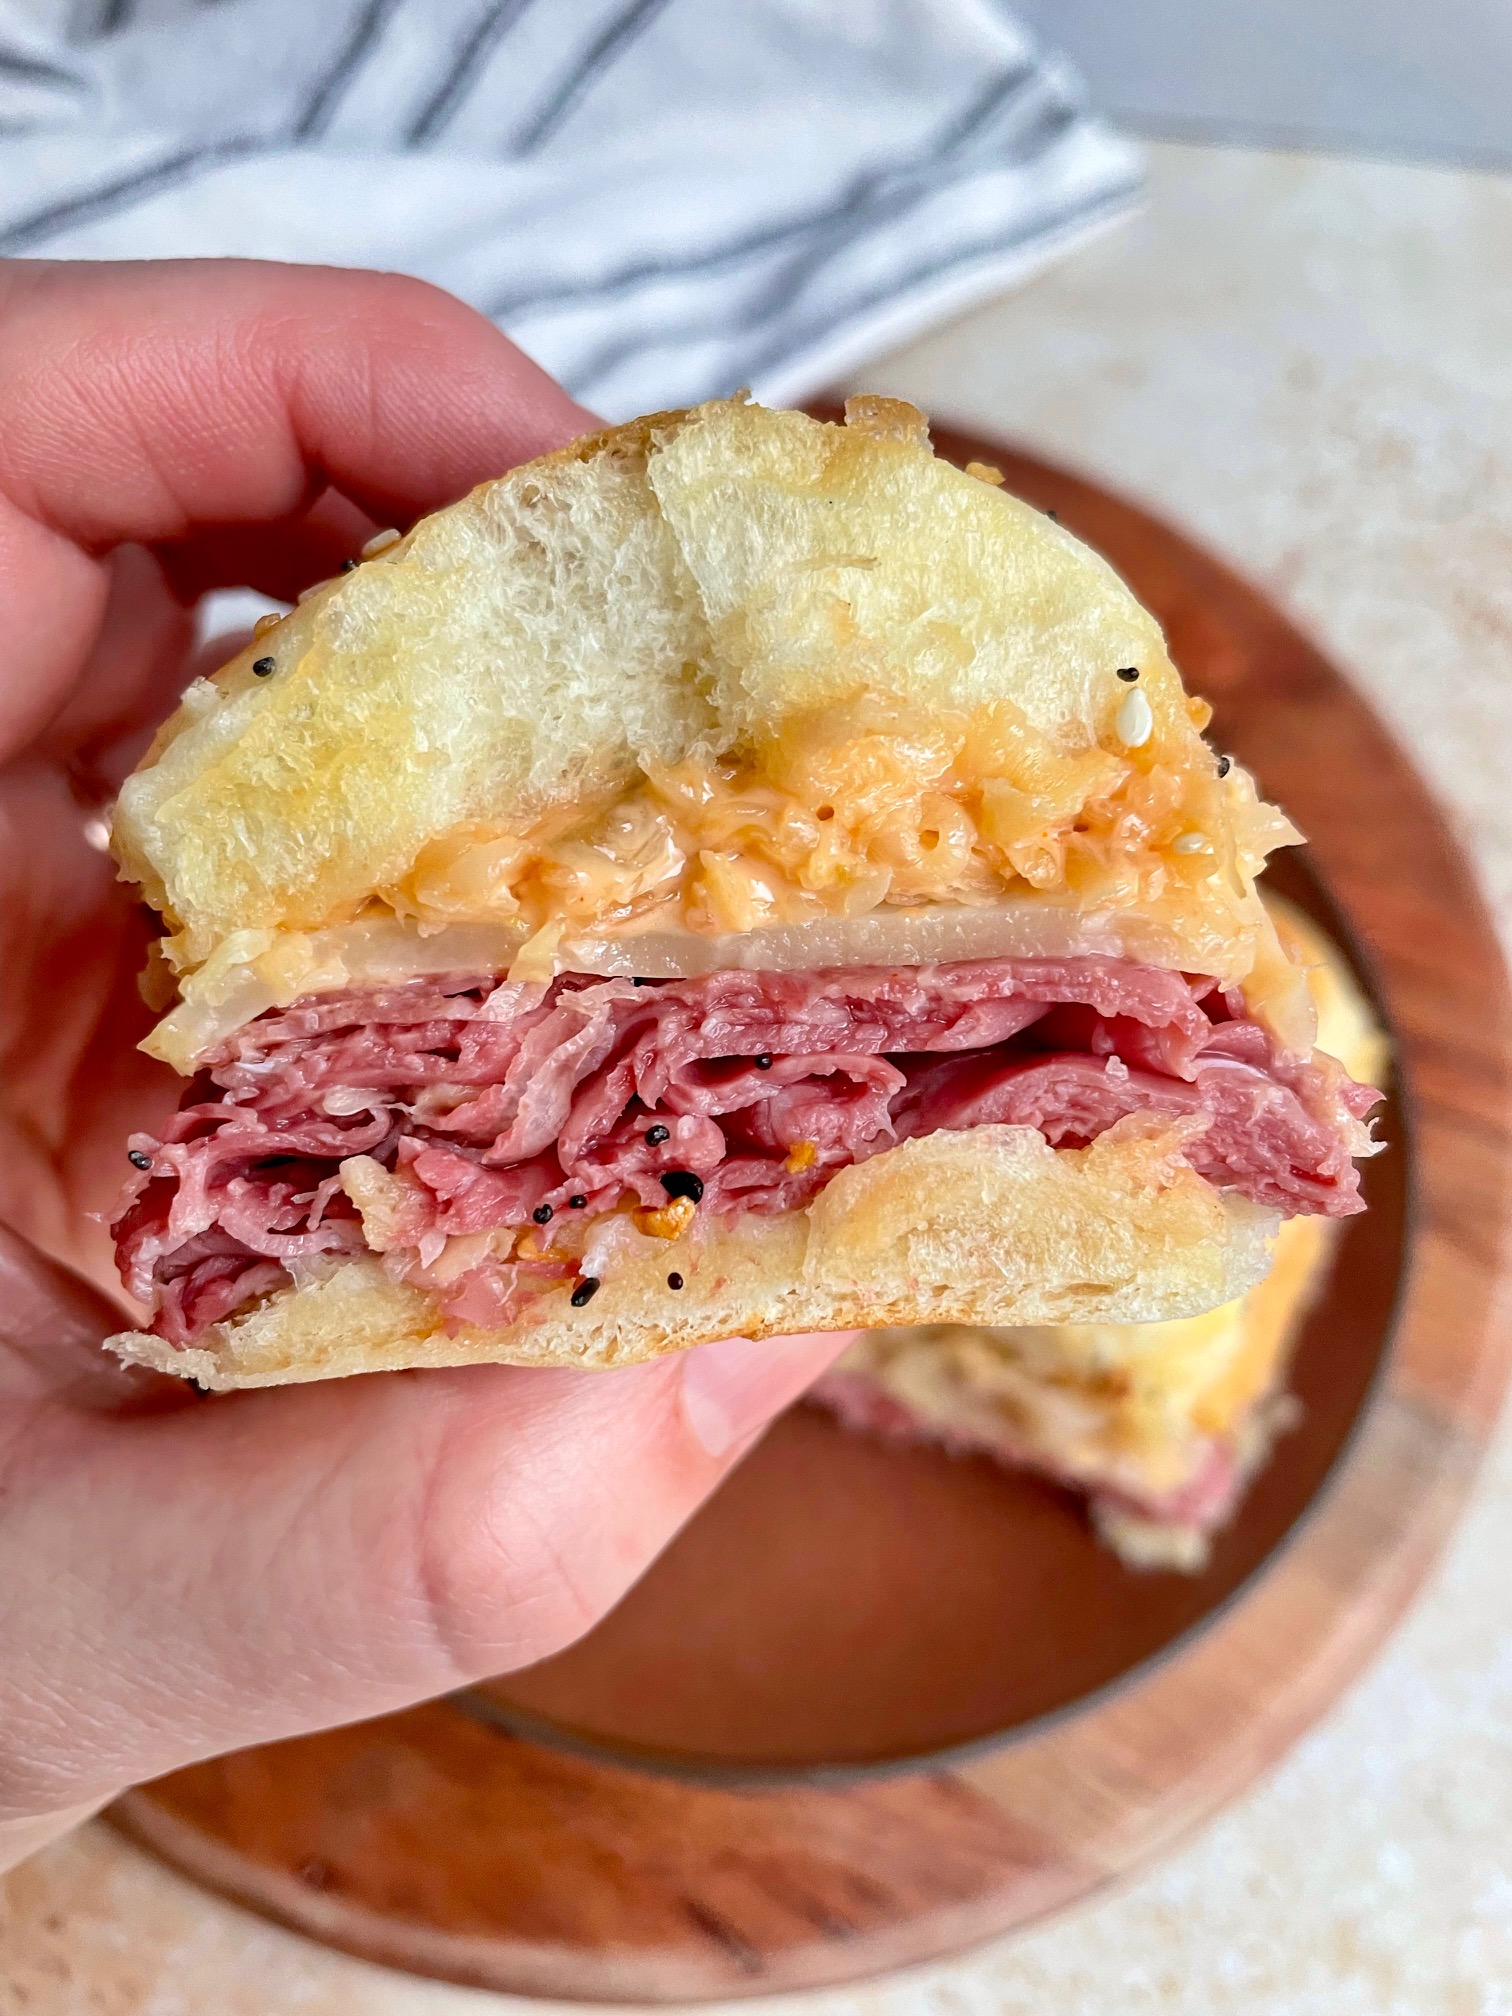 The cross section of one reuben slider.